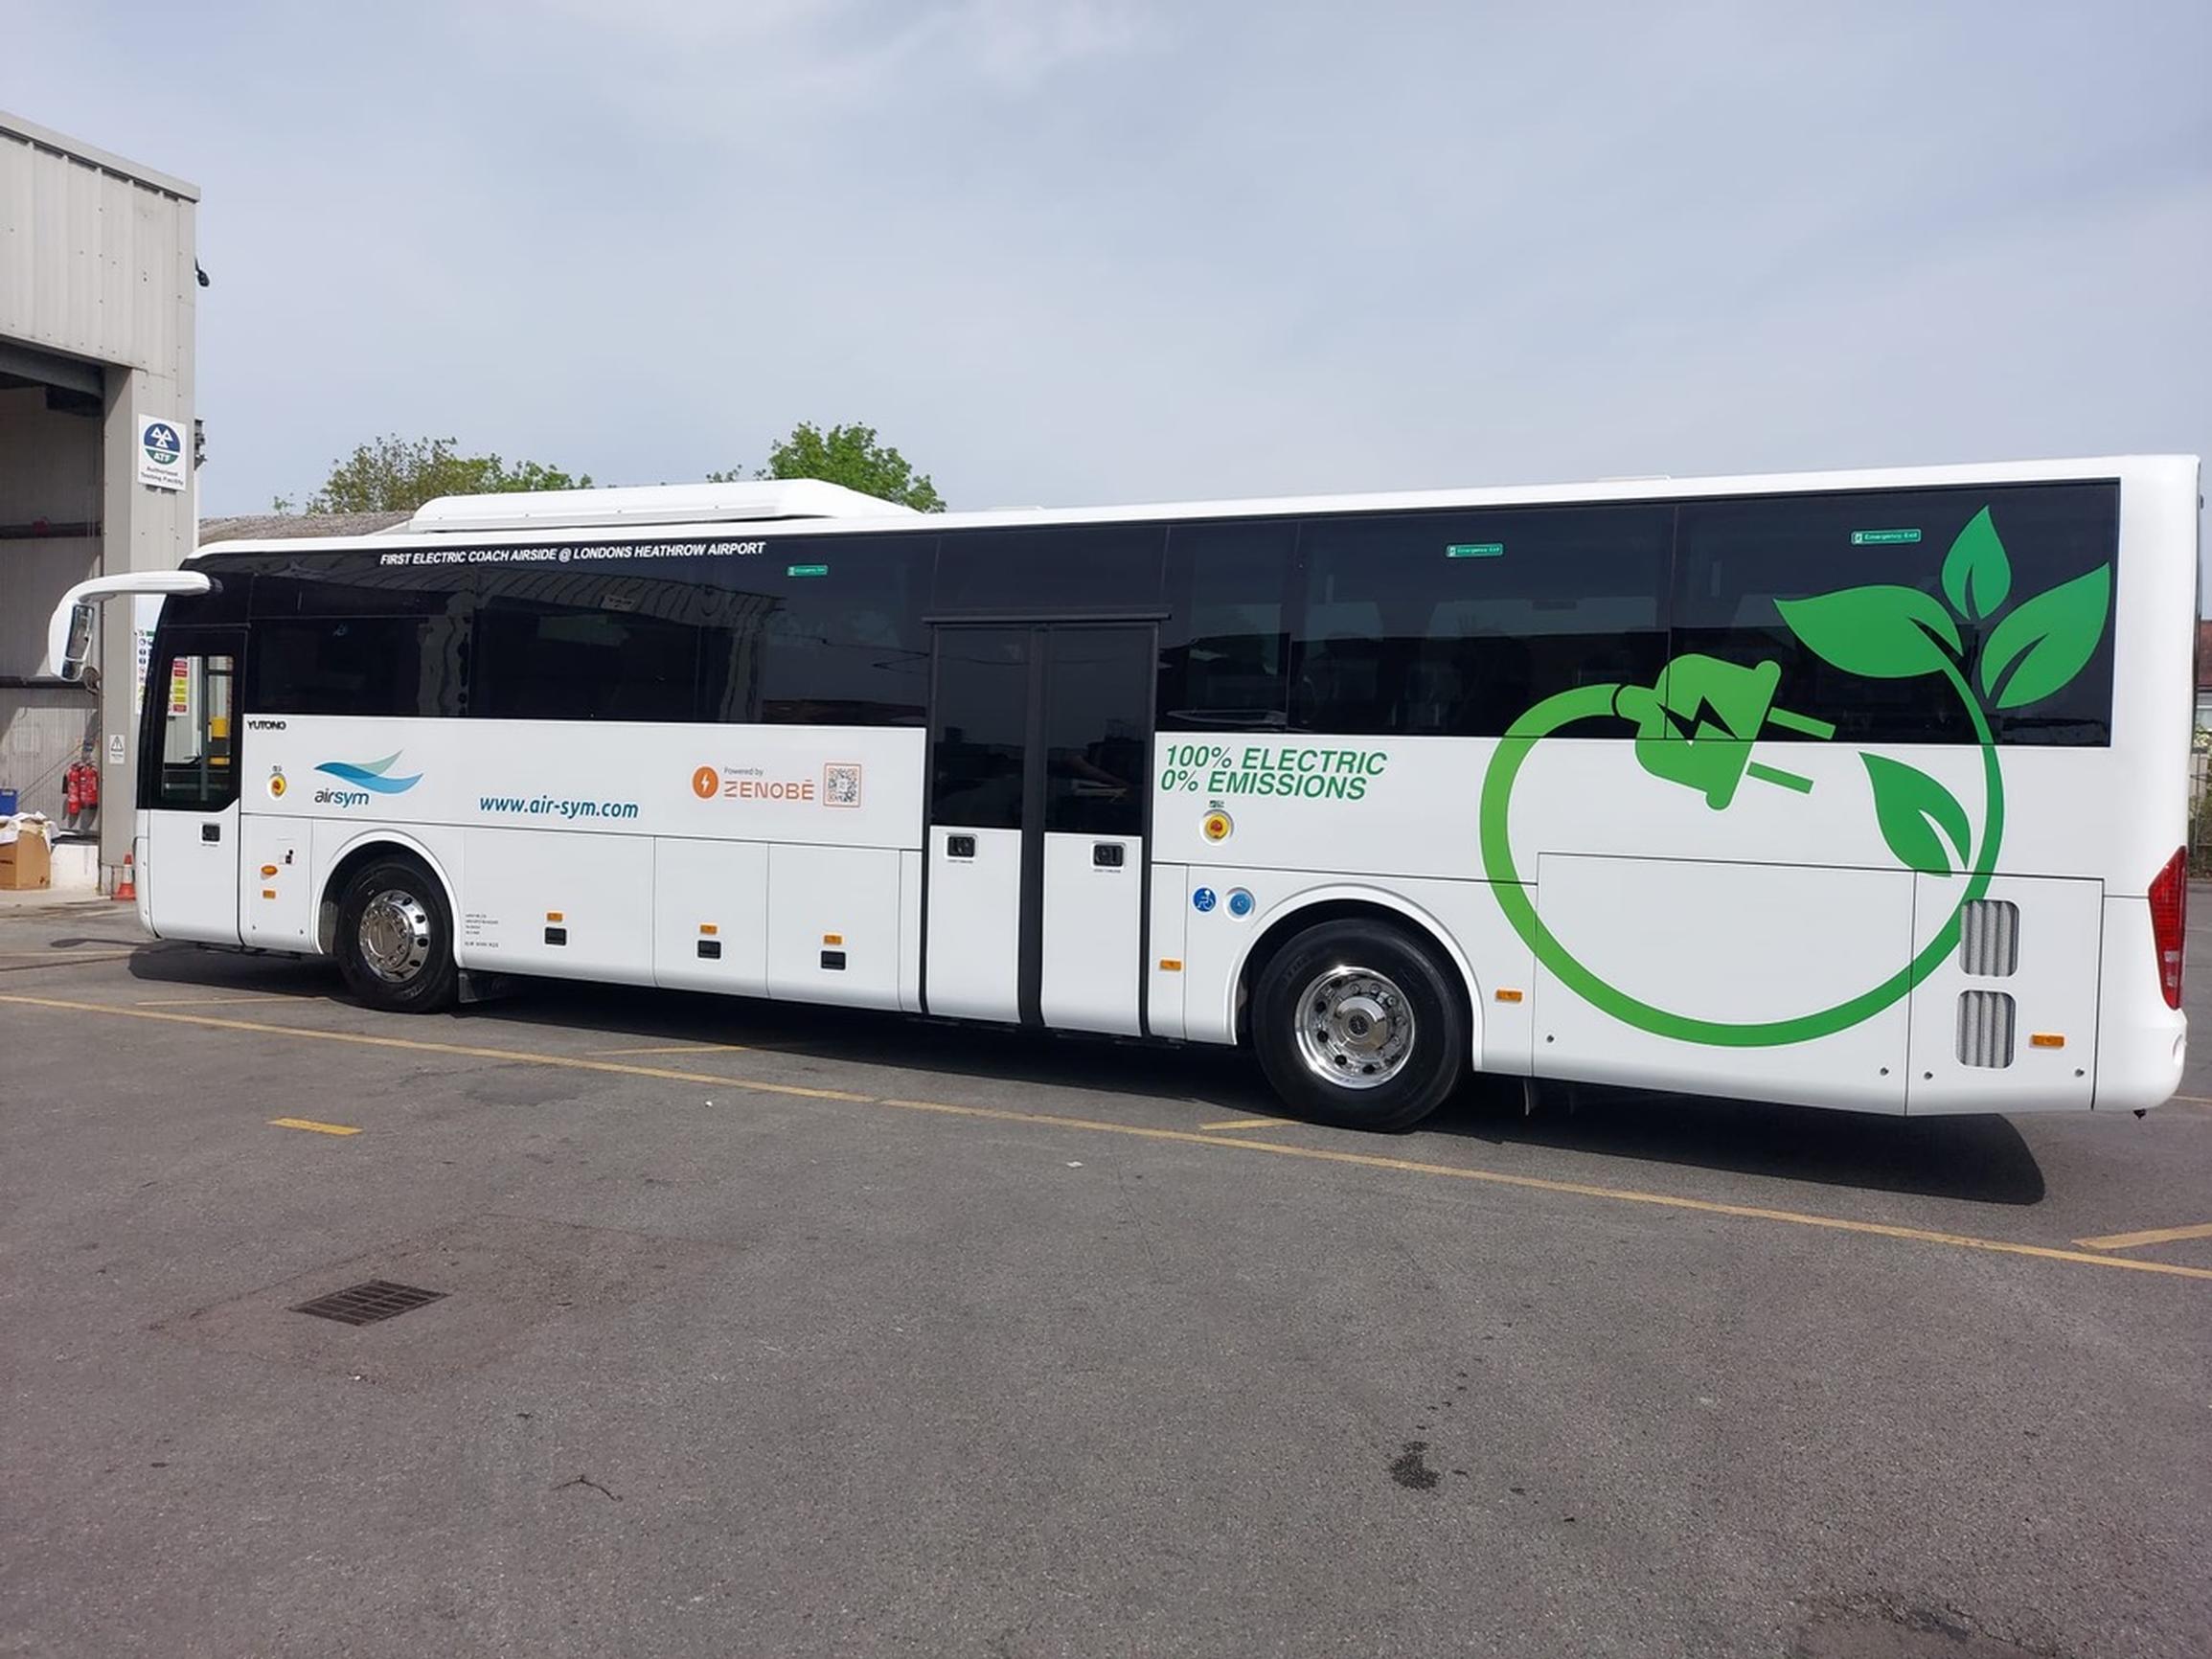 Zenob? has partnered with Airsym to develop an electric coach